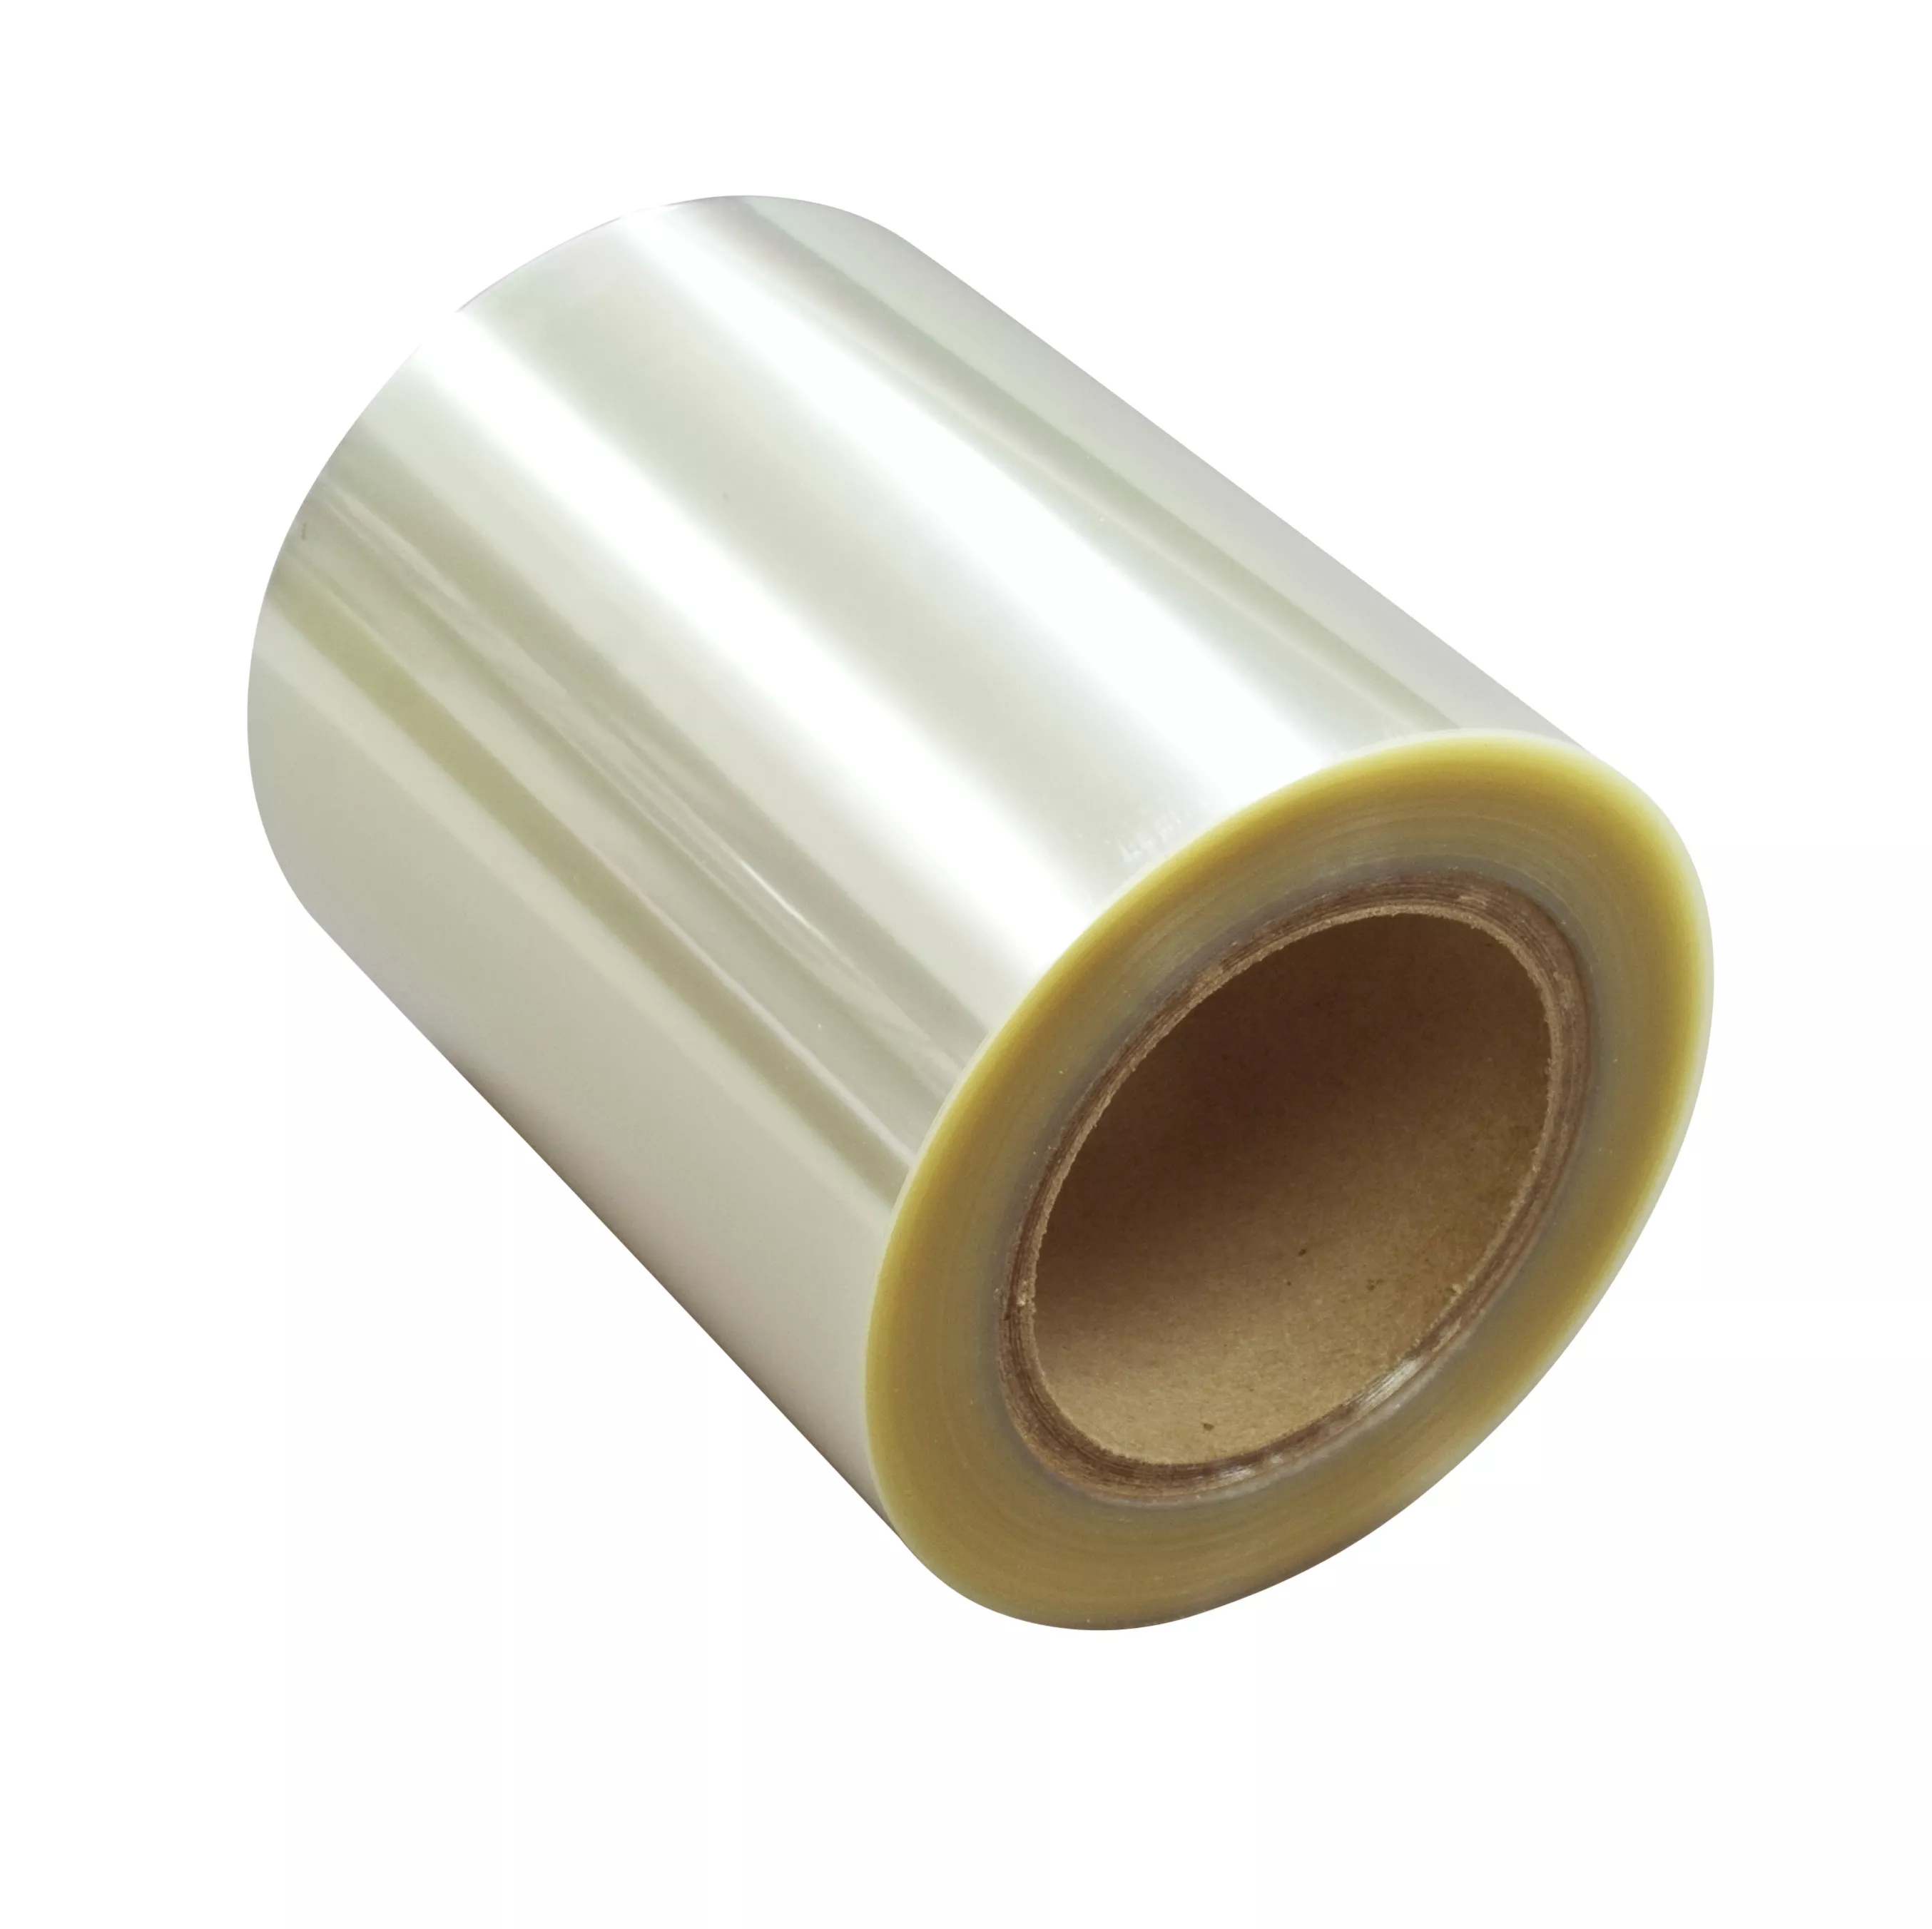 3M™ Overlaminate Label Material 7730FL, Clear Polyester, 6 in x 1668 ft,
1 Roll/Case